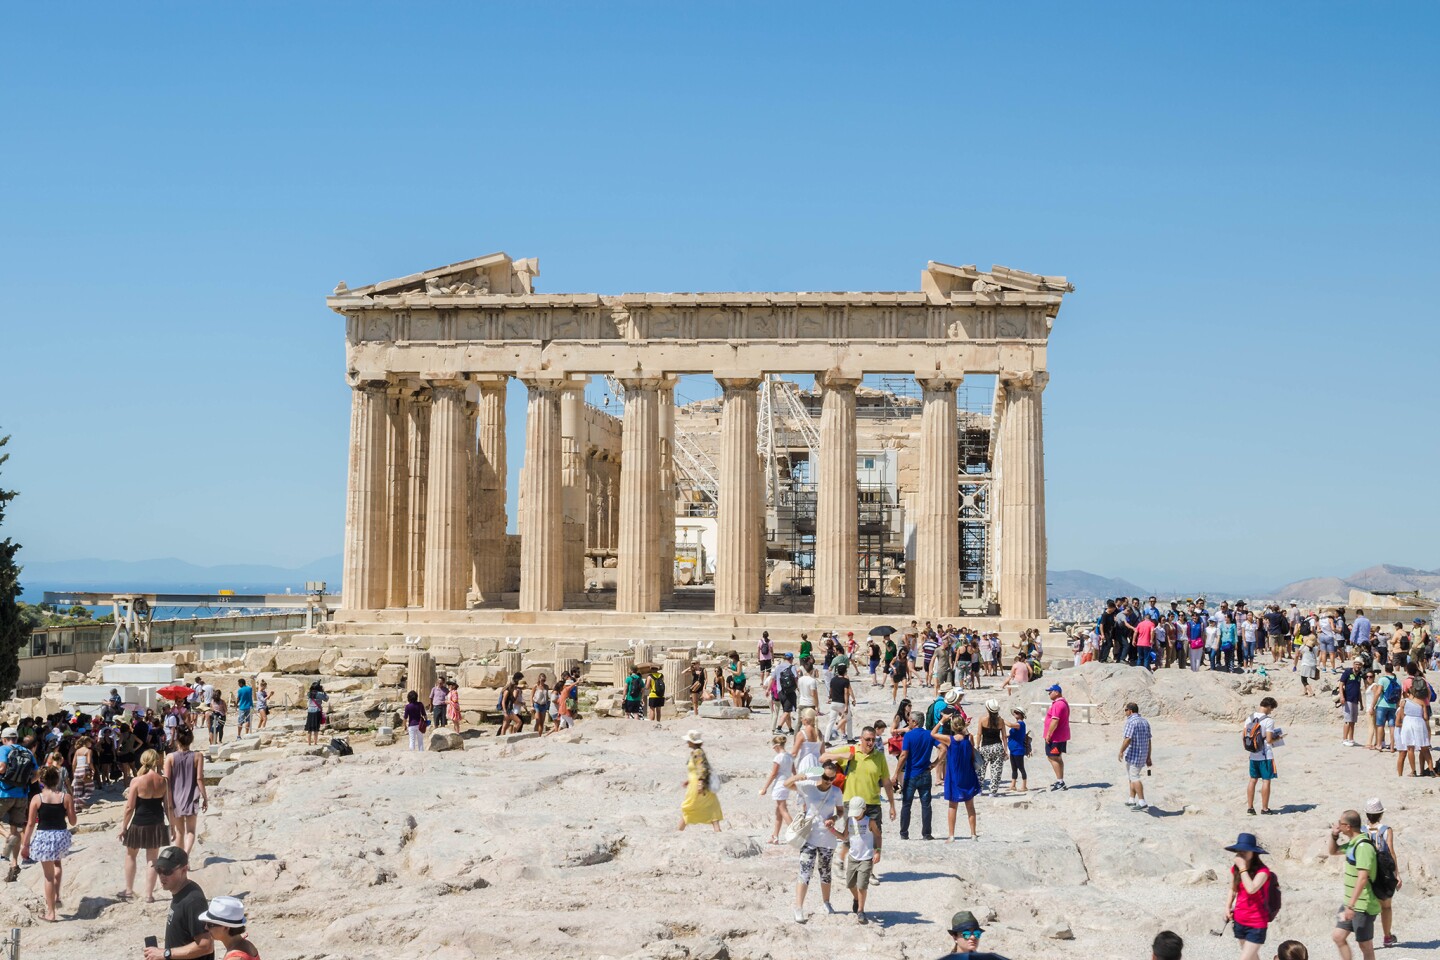 <h2>8. The Parthenon</h2> <p><i>Athens, Greece</i><br>Perched atop a rocky outcrop known as the <a class="Link" href="https://whc.unesco.org/en/list/404" rel="noopener">Acropolis</a>, in Athens, this classical and partly intact temple has presided over Greece’s capital city since the Athenian Empire was at the peak of its power. In 447 B.C.E., the Athenians constructed the Parthenon—dedicated to the goddess Athena—to celebrate their victory over Persian invaders. It has since served as a city treasury, a Christian church dedicated to the Virgin Mary and, after the Ottoman conquest, a mosque. At the foot of the hill, the <a class="Link" href="https://www.afar.com/places/acropolis-museum-athina" rel="noopener">Acropolis Museum</a> showcases the Parthenon frieze (although some sections are still controversially on display at London’s British Museum), artifacts discovered on the Acropolis, and even the remains of an ancient neighborhood uncovered during the museum’s construction.</p> <h3>How to visit</h3> <p>Located in the center of Athens, the Parthenon is easy to visit thanks to metro and city bus stops nearby. The nearest metro stop is Acropoli. Tickets to the Acropolis can be purchased online or at the entrance. During high season, tickets to the Acropolis cost approximately $35 for adults and half that during the winter; entry is roughly $11 for students with ID.</p>